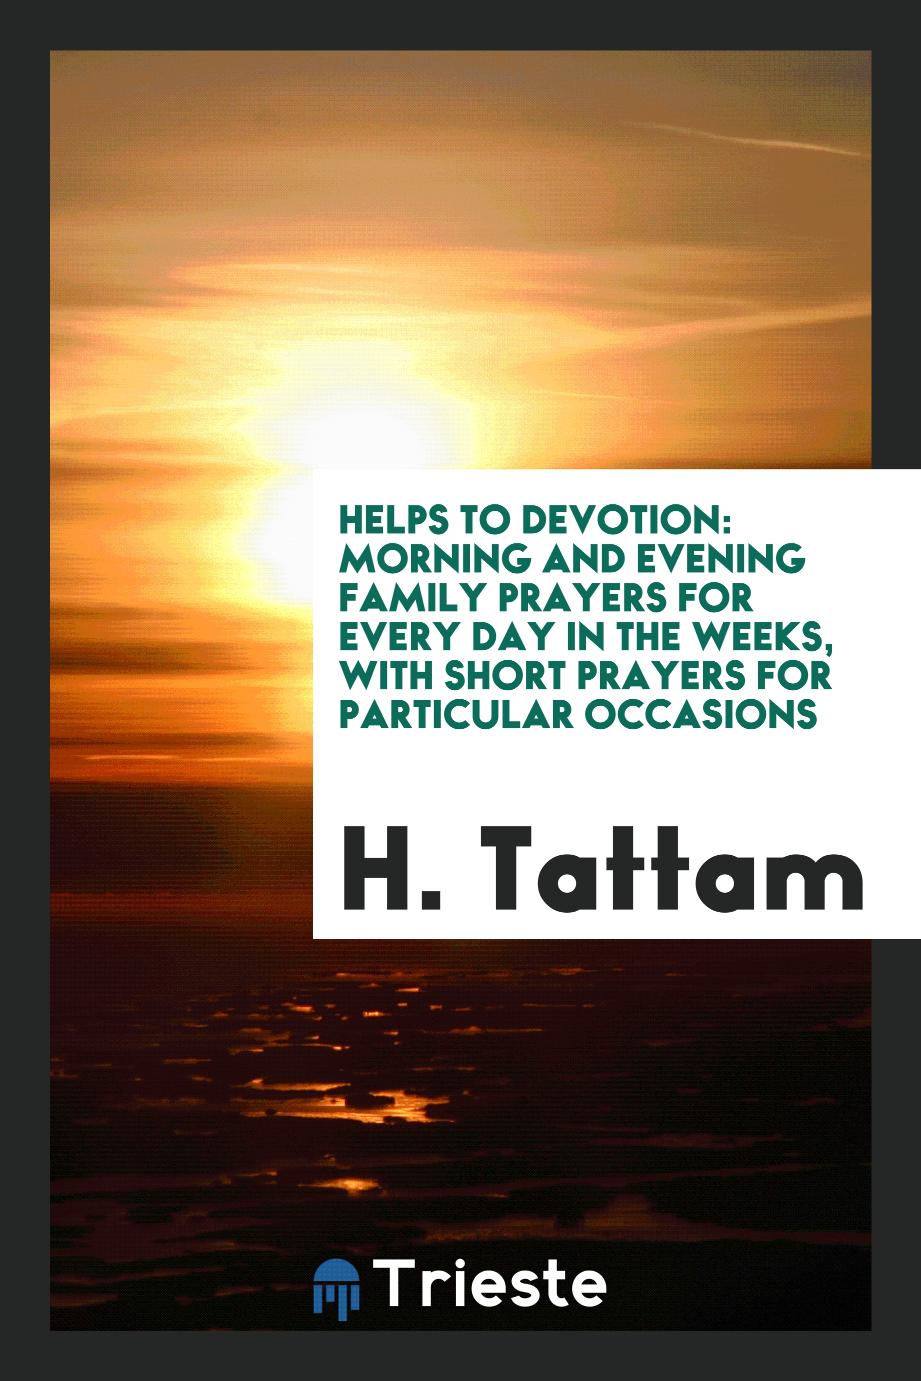 Helps to Devotion: Morning and Evening Family Prayers for Every Day in the Weeks, with Short Prayers for Particular Occasions